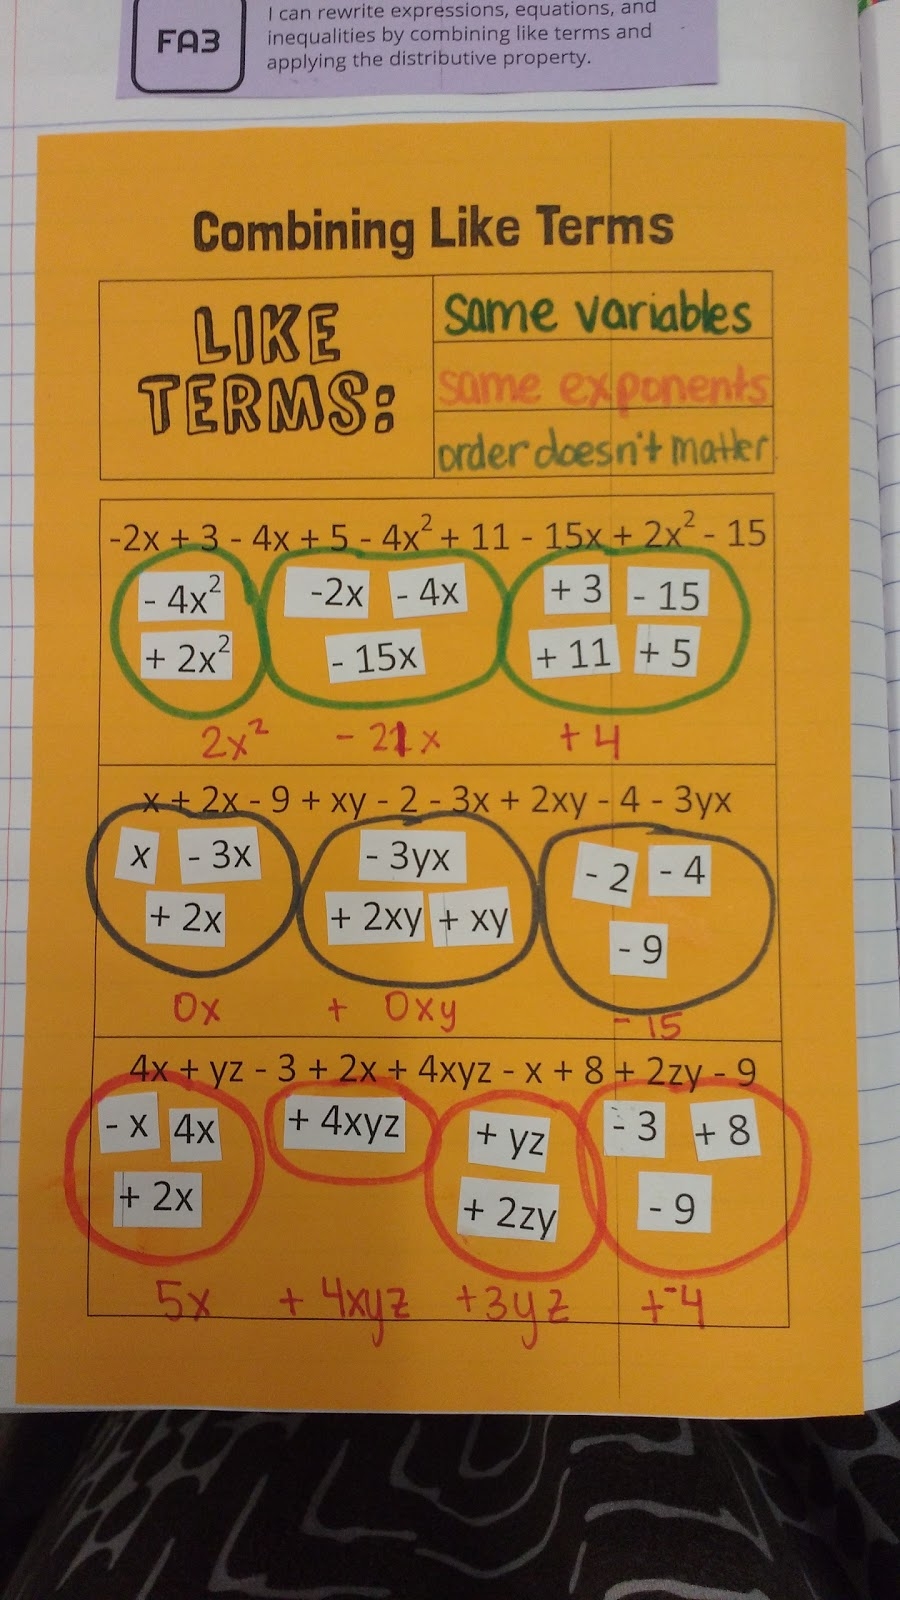 combining-like-terms-cut-and-paste-activity-math-love-math-worksheet-answers